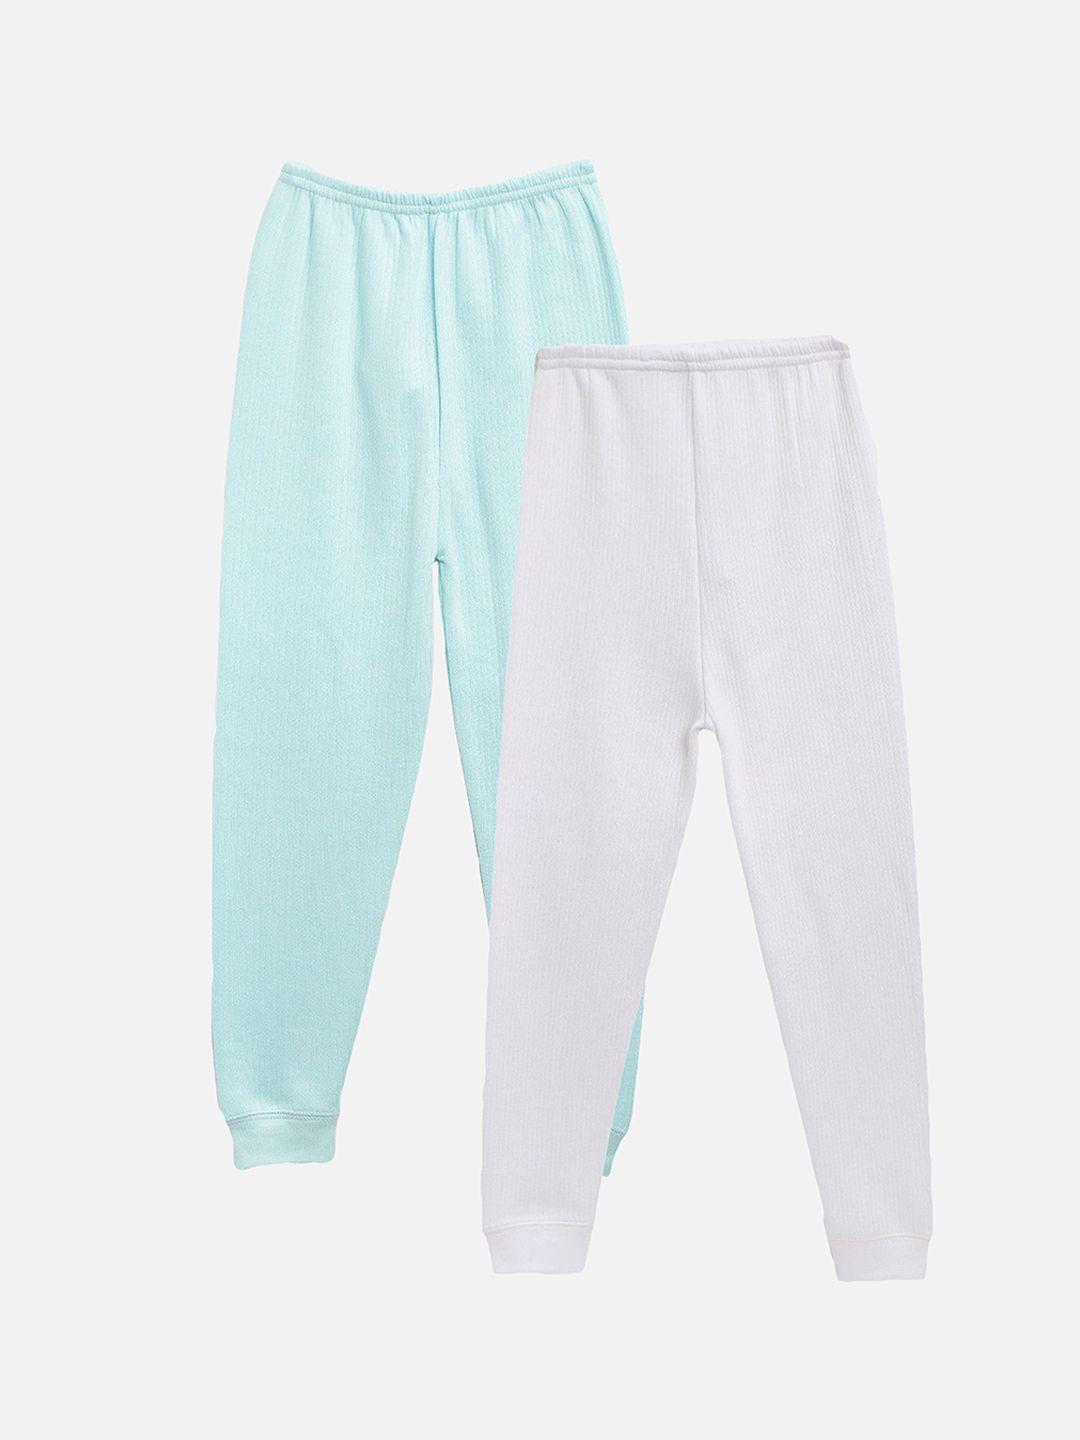 kanvin boys turquoise blue & white solid thermal bottoms